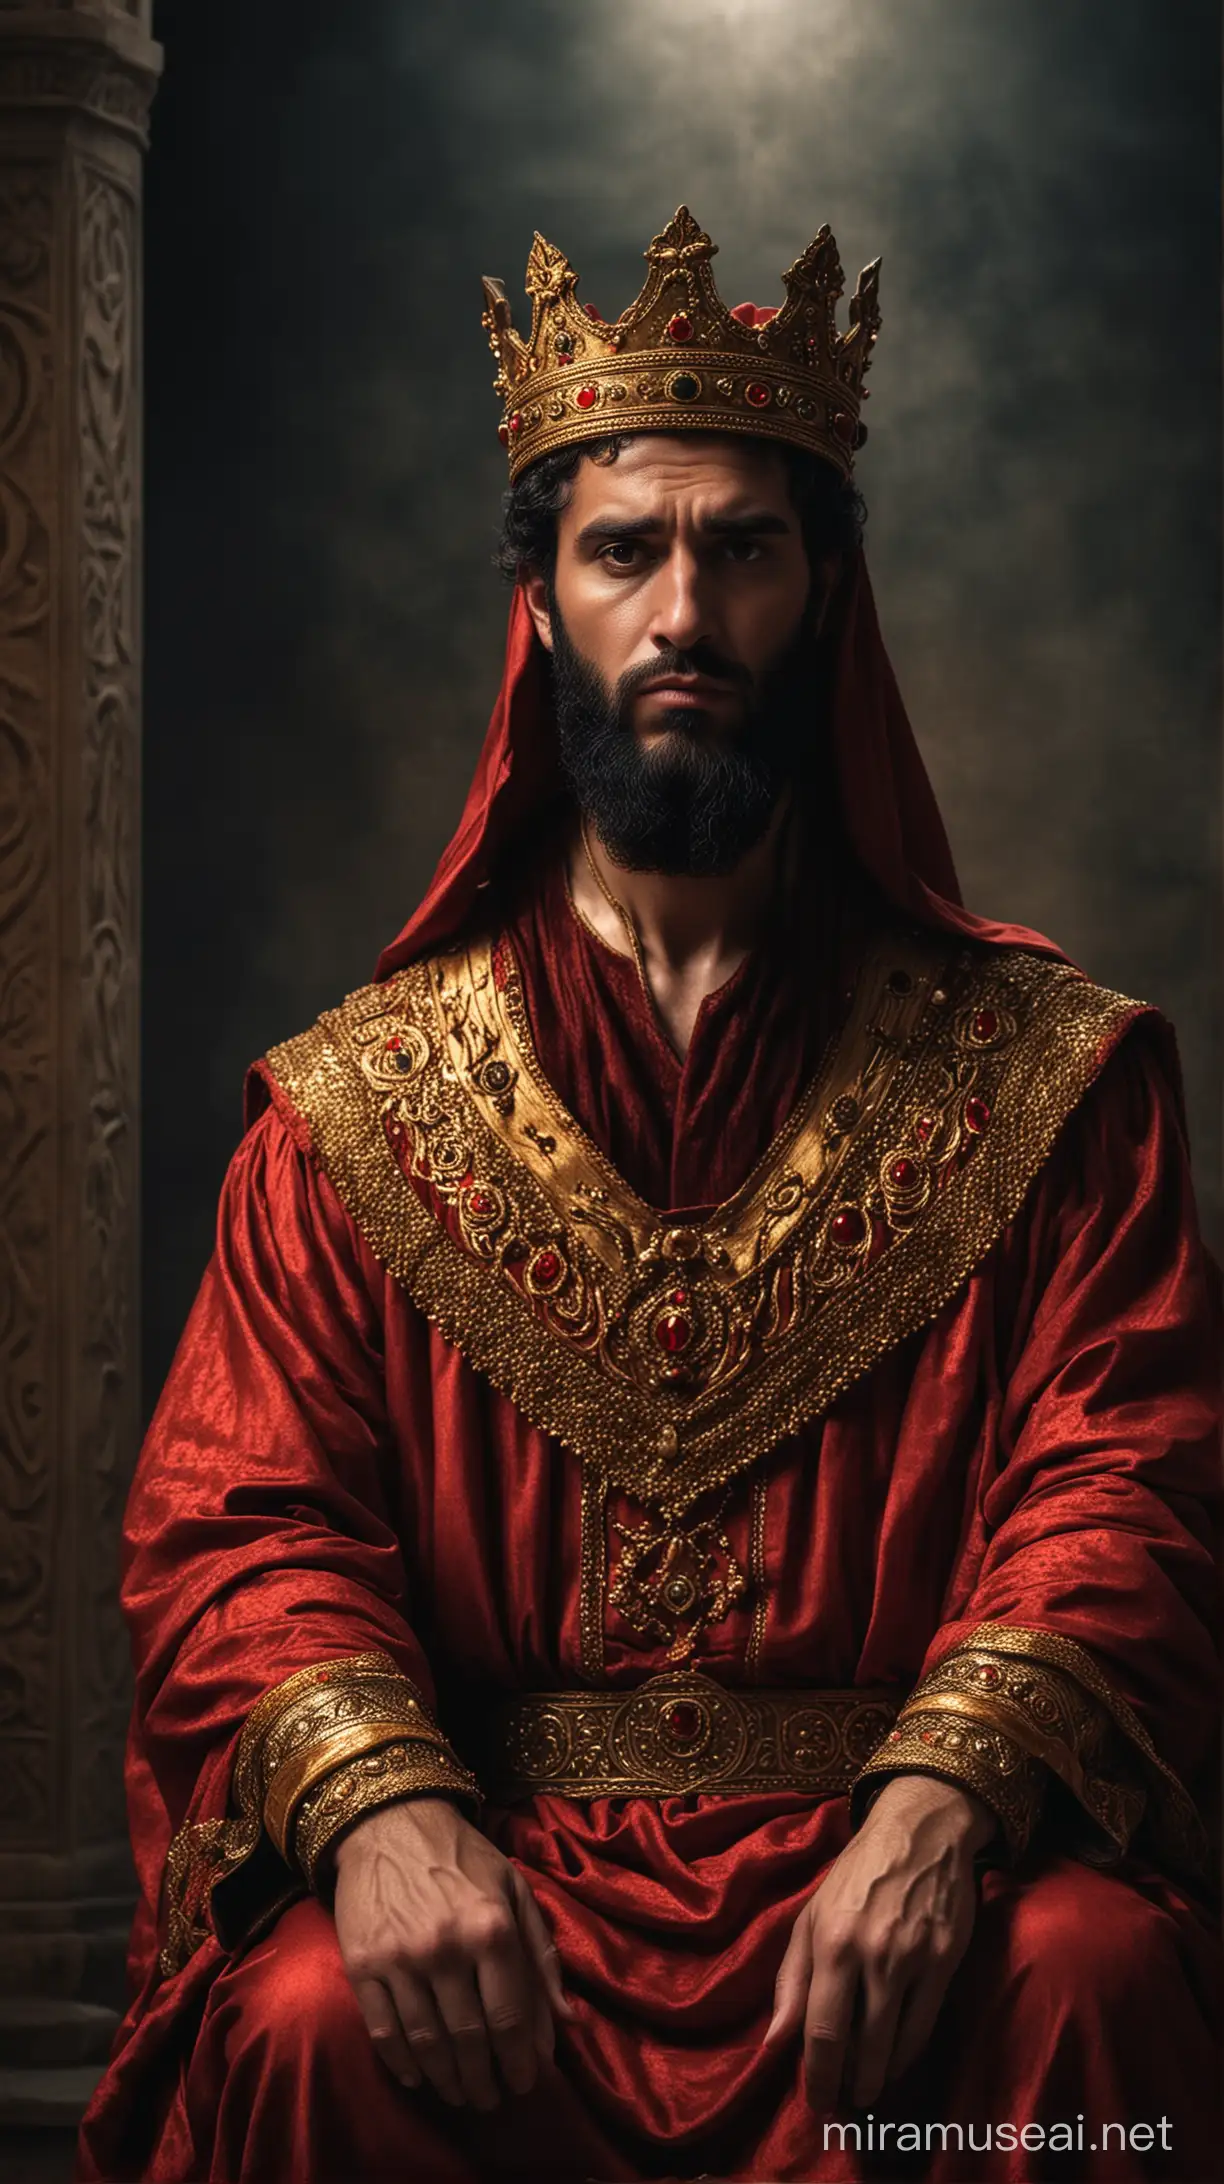 Herod the Great in Regal Red and Gold Attire Contemplating in Moody Setting